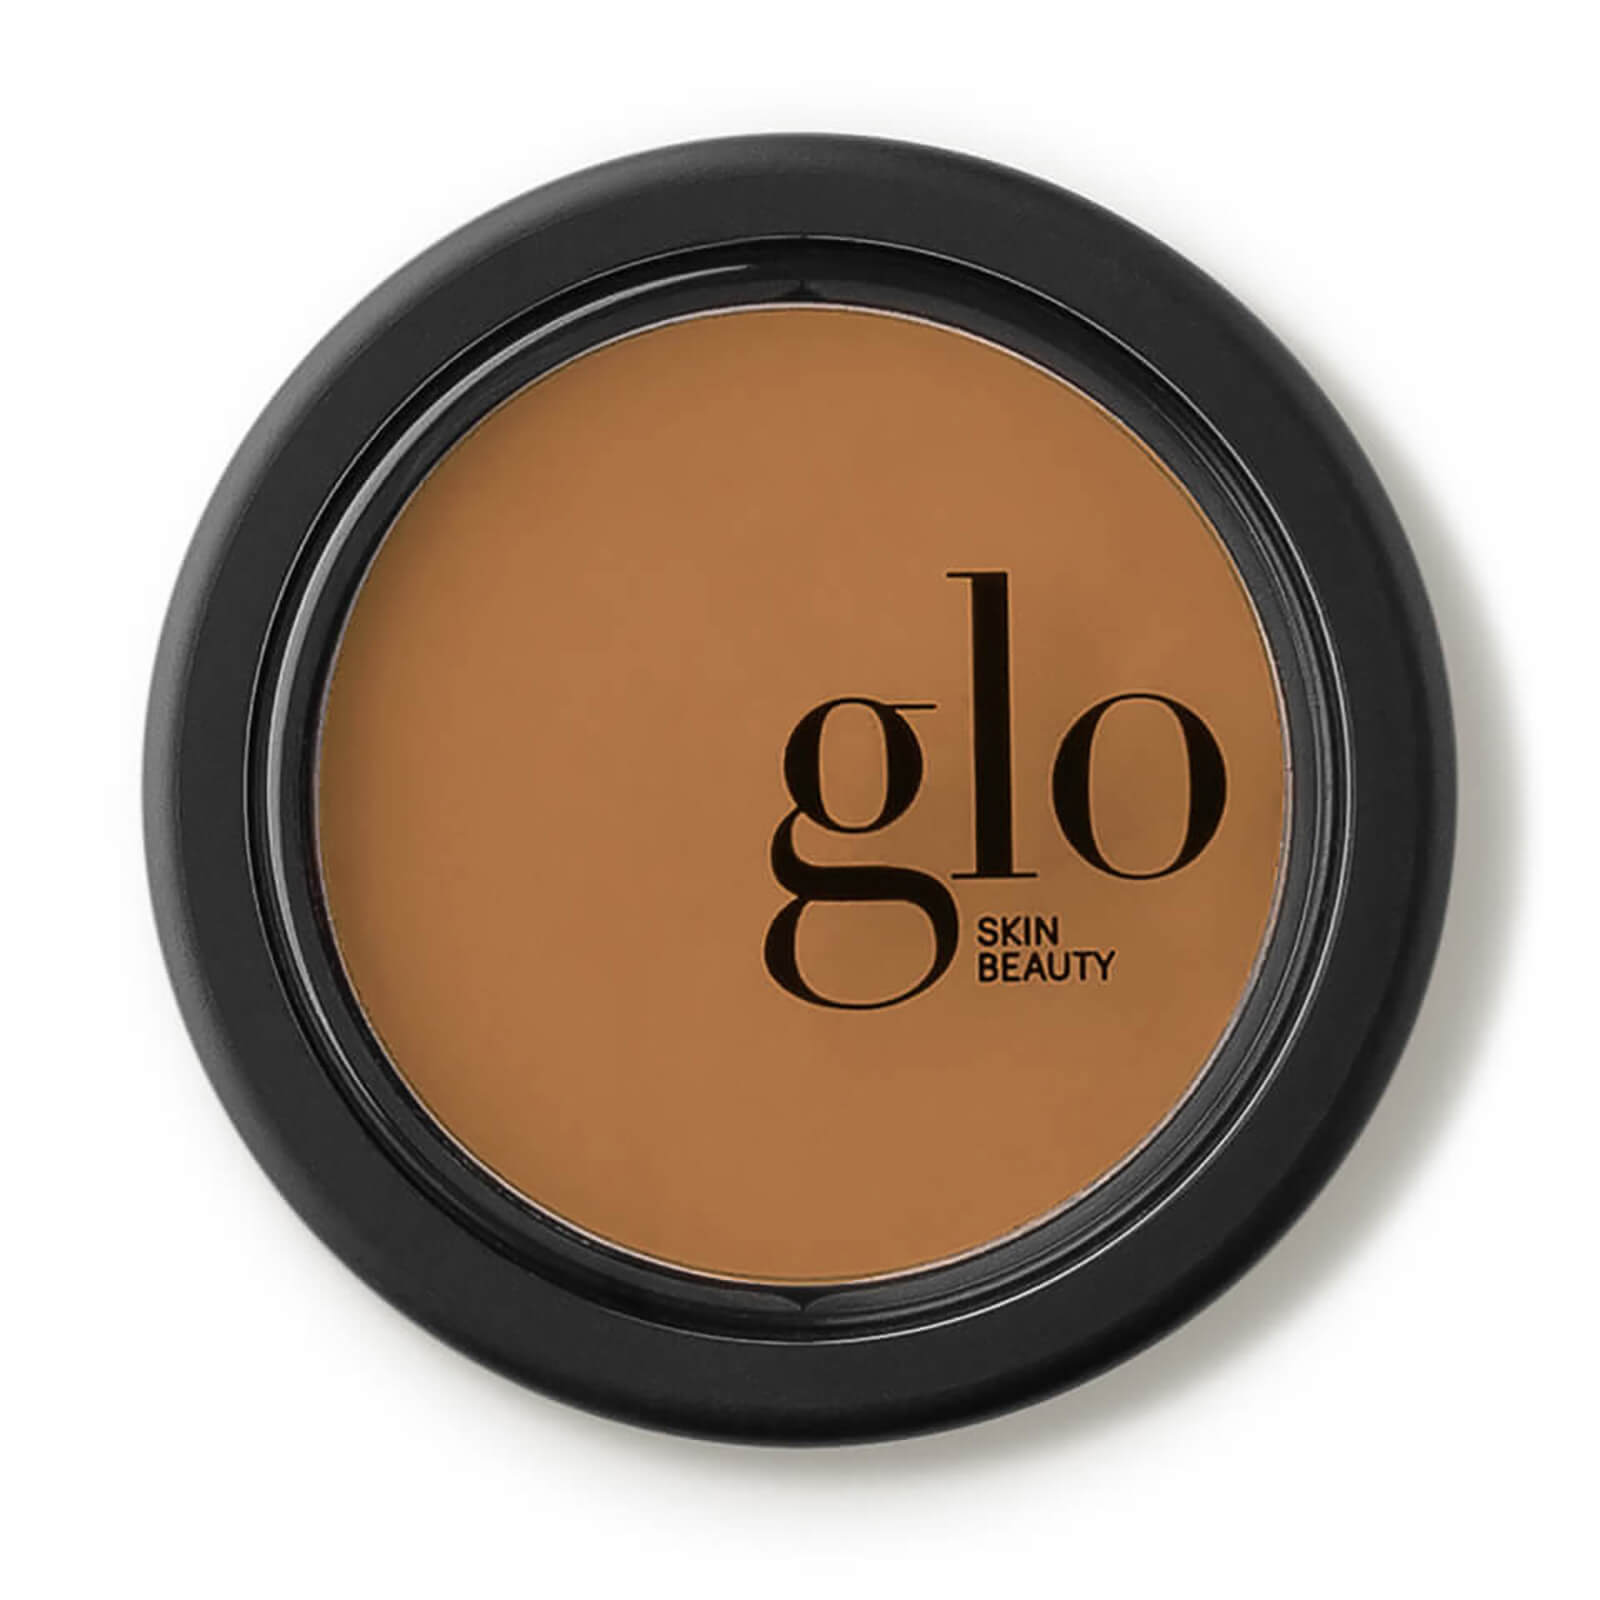 Glo Skin Beauty Oil-free Camouflage Concealer (0.11 Oz.) In Tawny